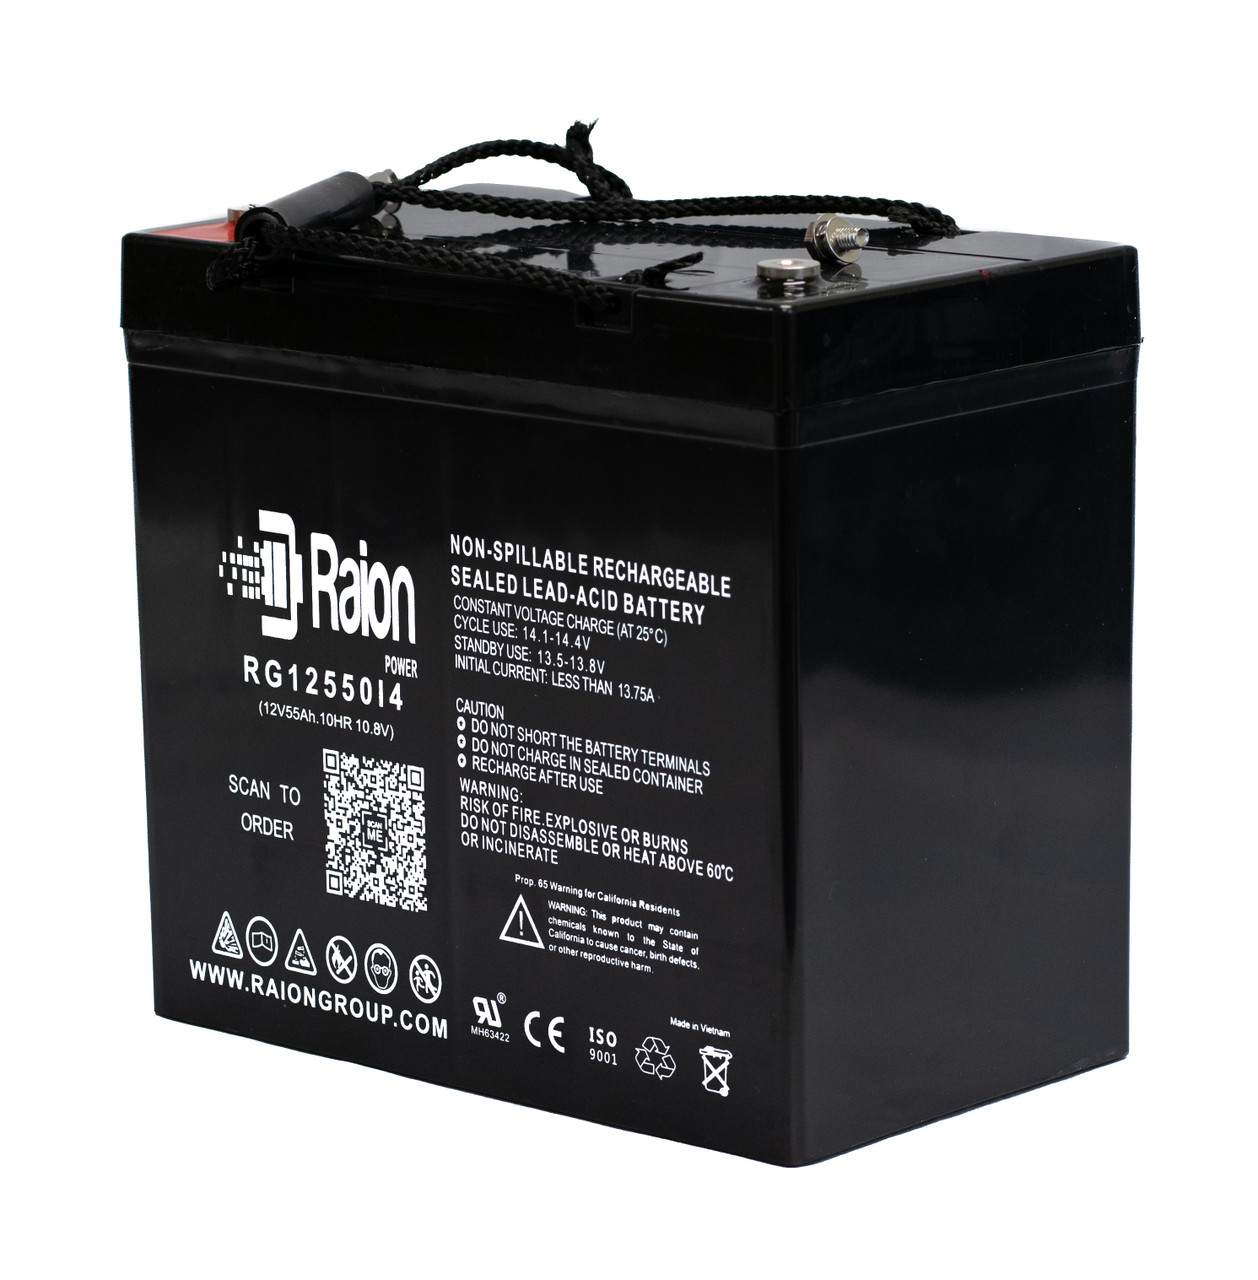 Raion Power 12V 55Ah 22NF Mobility Scooter Battery Replacement for Fortress Scooters 2200 FS